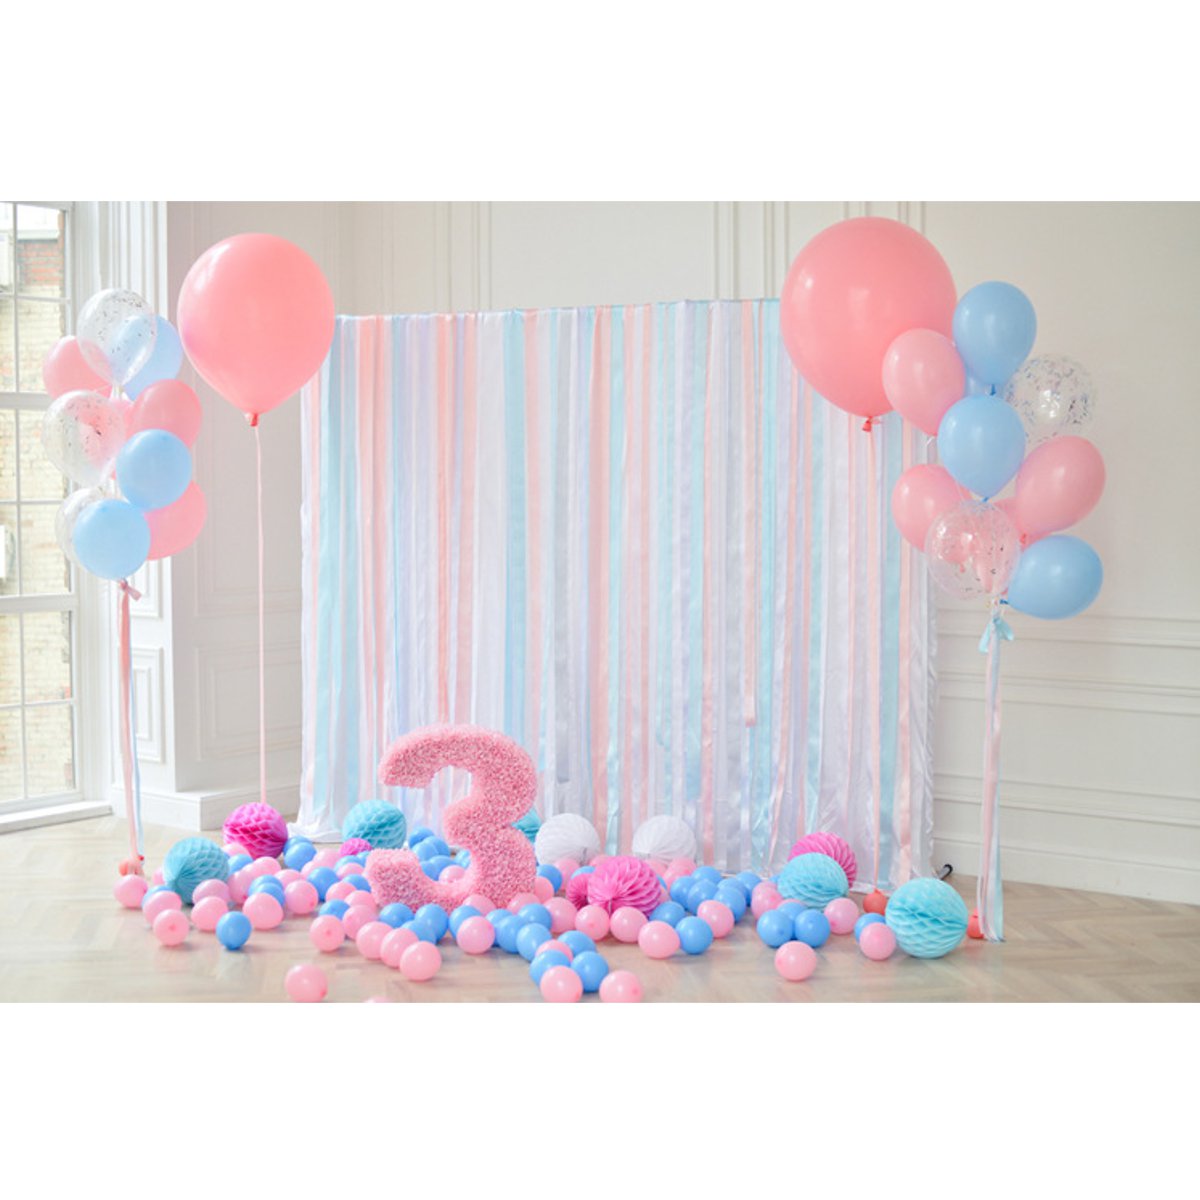 5x3FT-7x5FT-9x6FT-Vinyl-Pink-Blue-Balloon-3-Years-Old-Birthday-Photography-Backdrop-Background-Studi-1635482-2